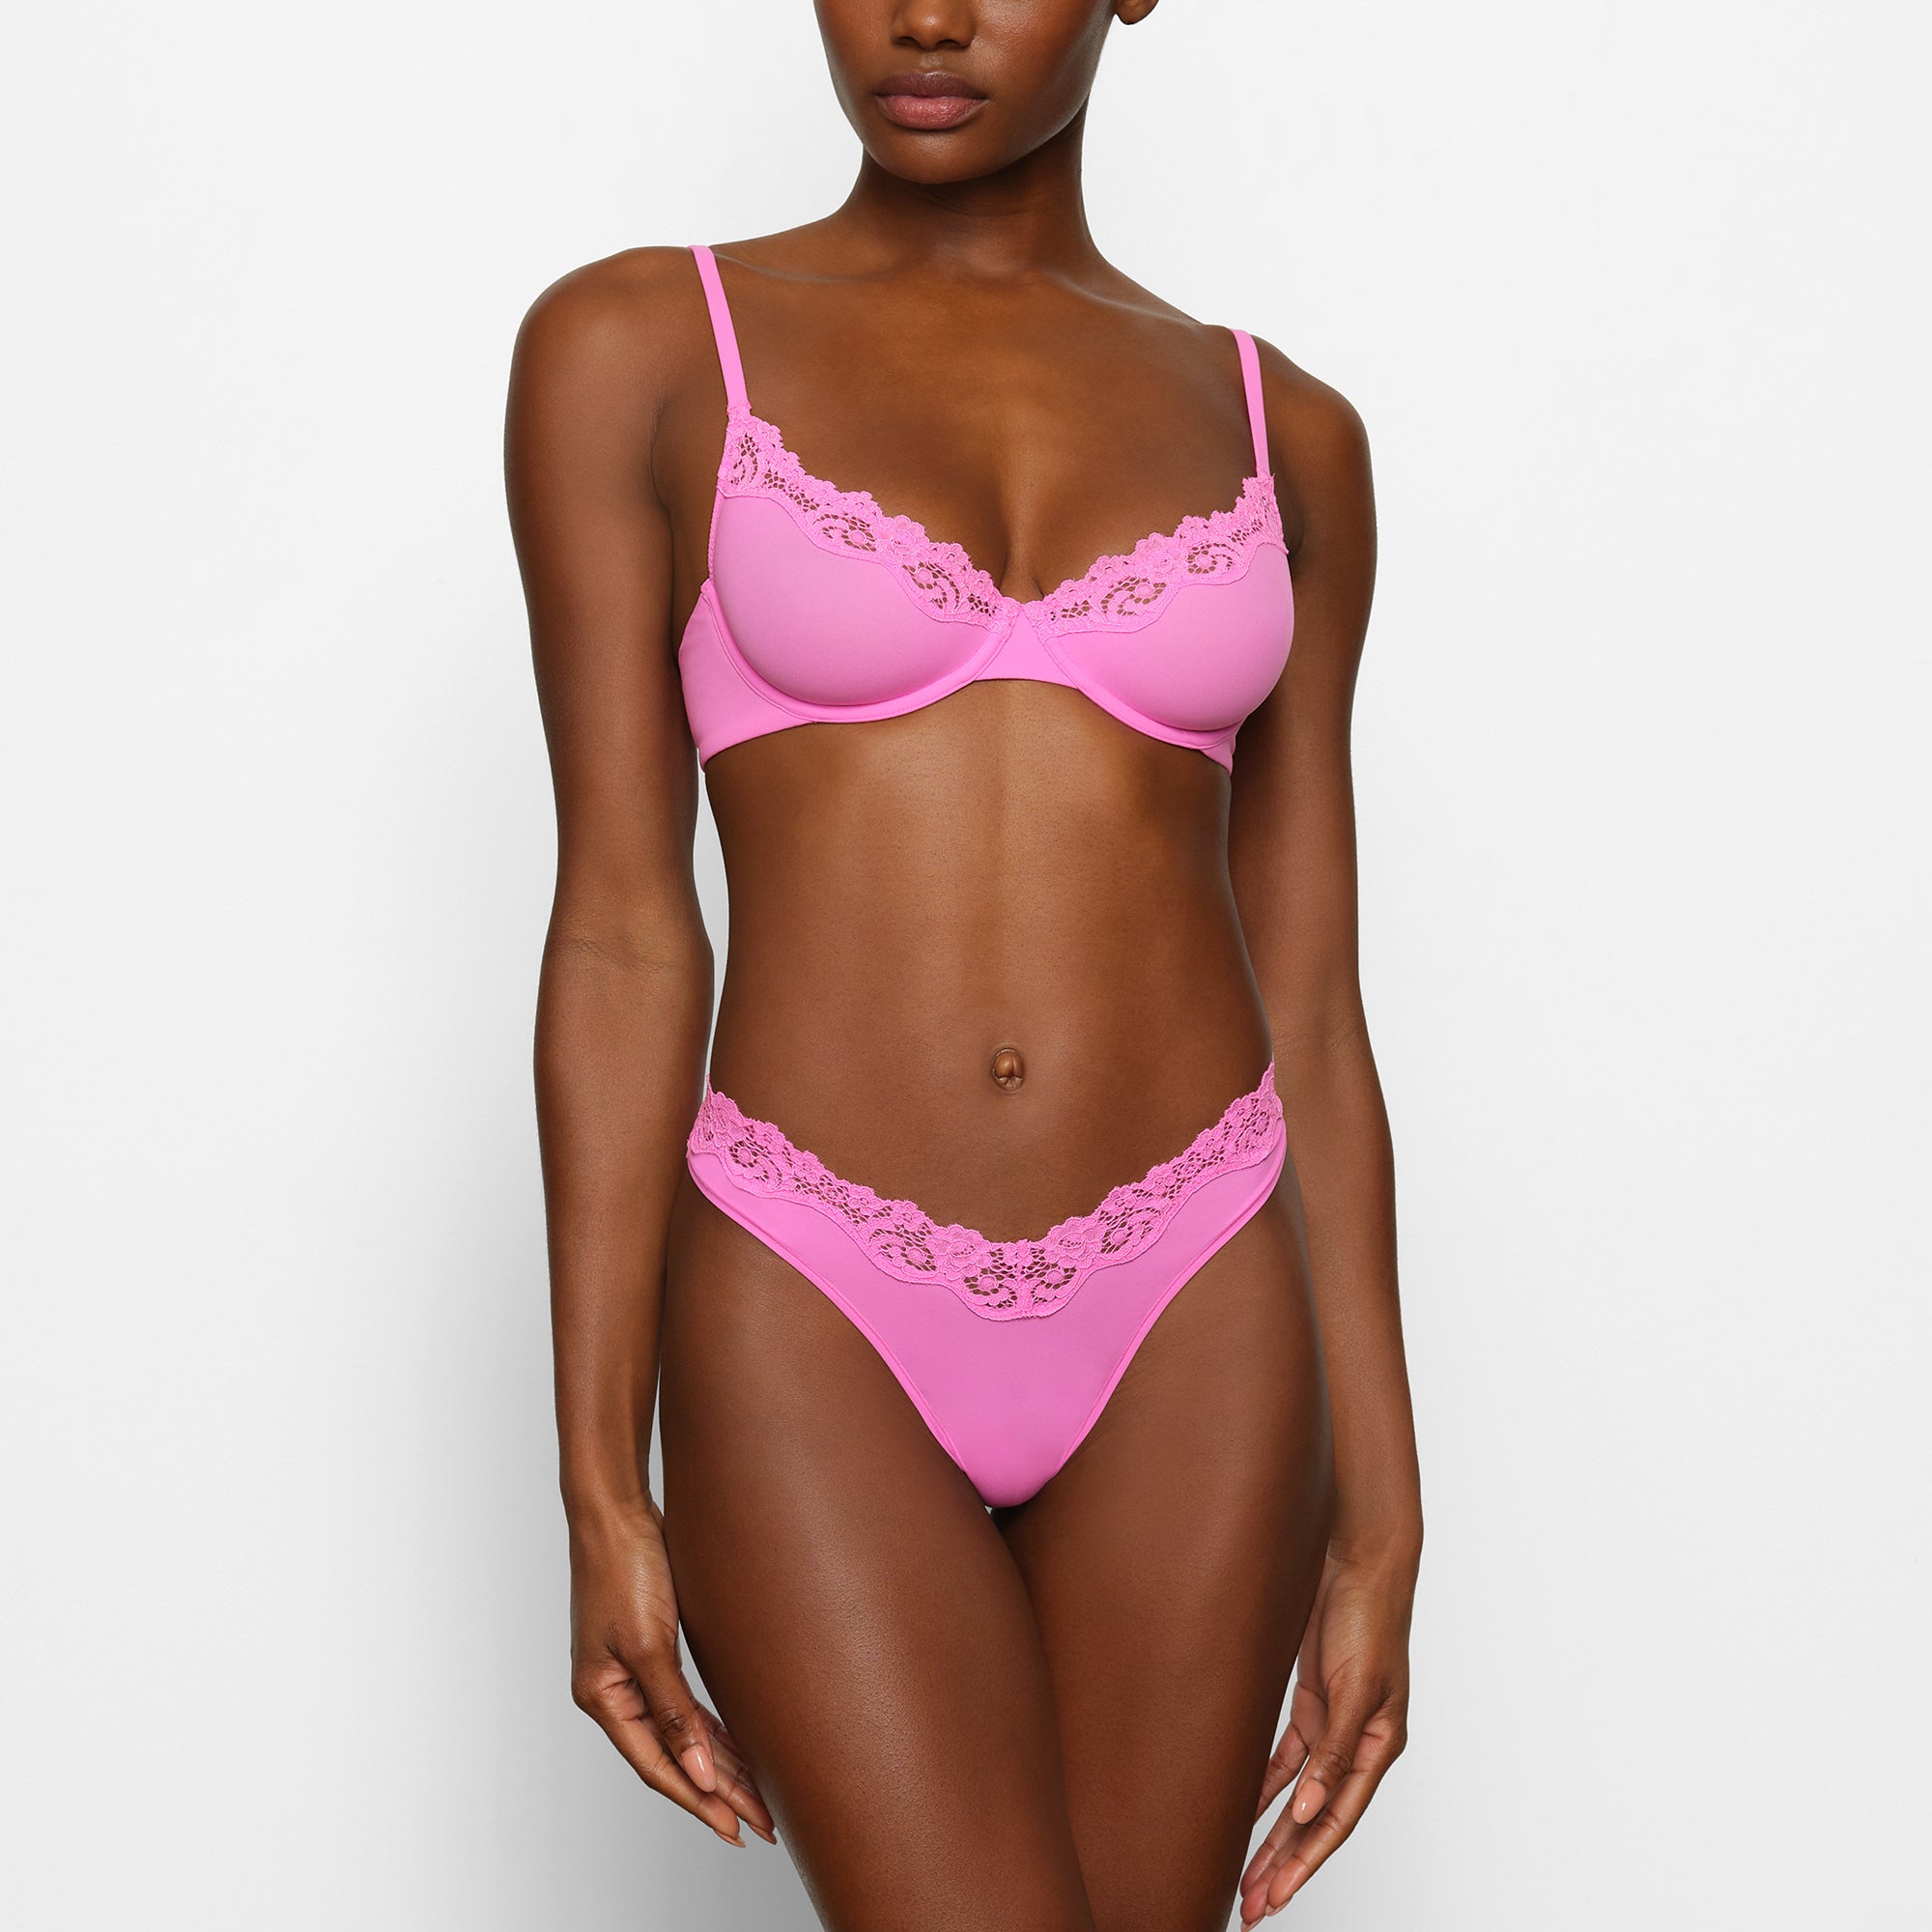 Track Fits Everybody Lace T Shirt Bra - Neon Pink - 36 - DD at Skims